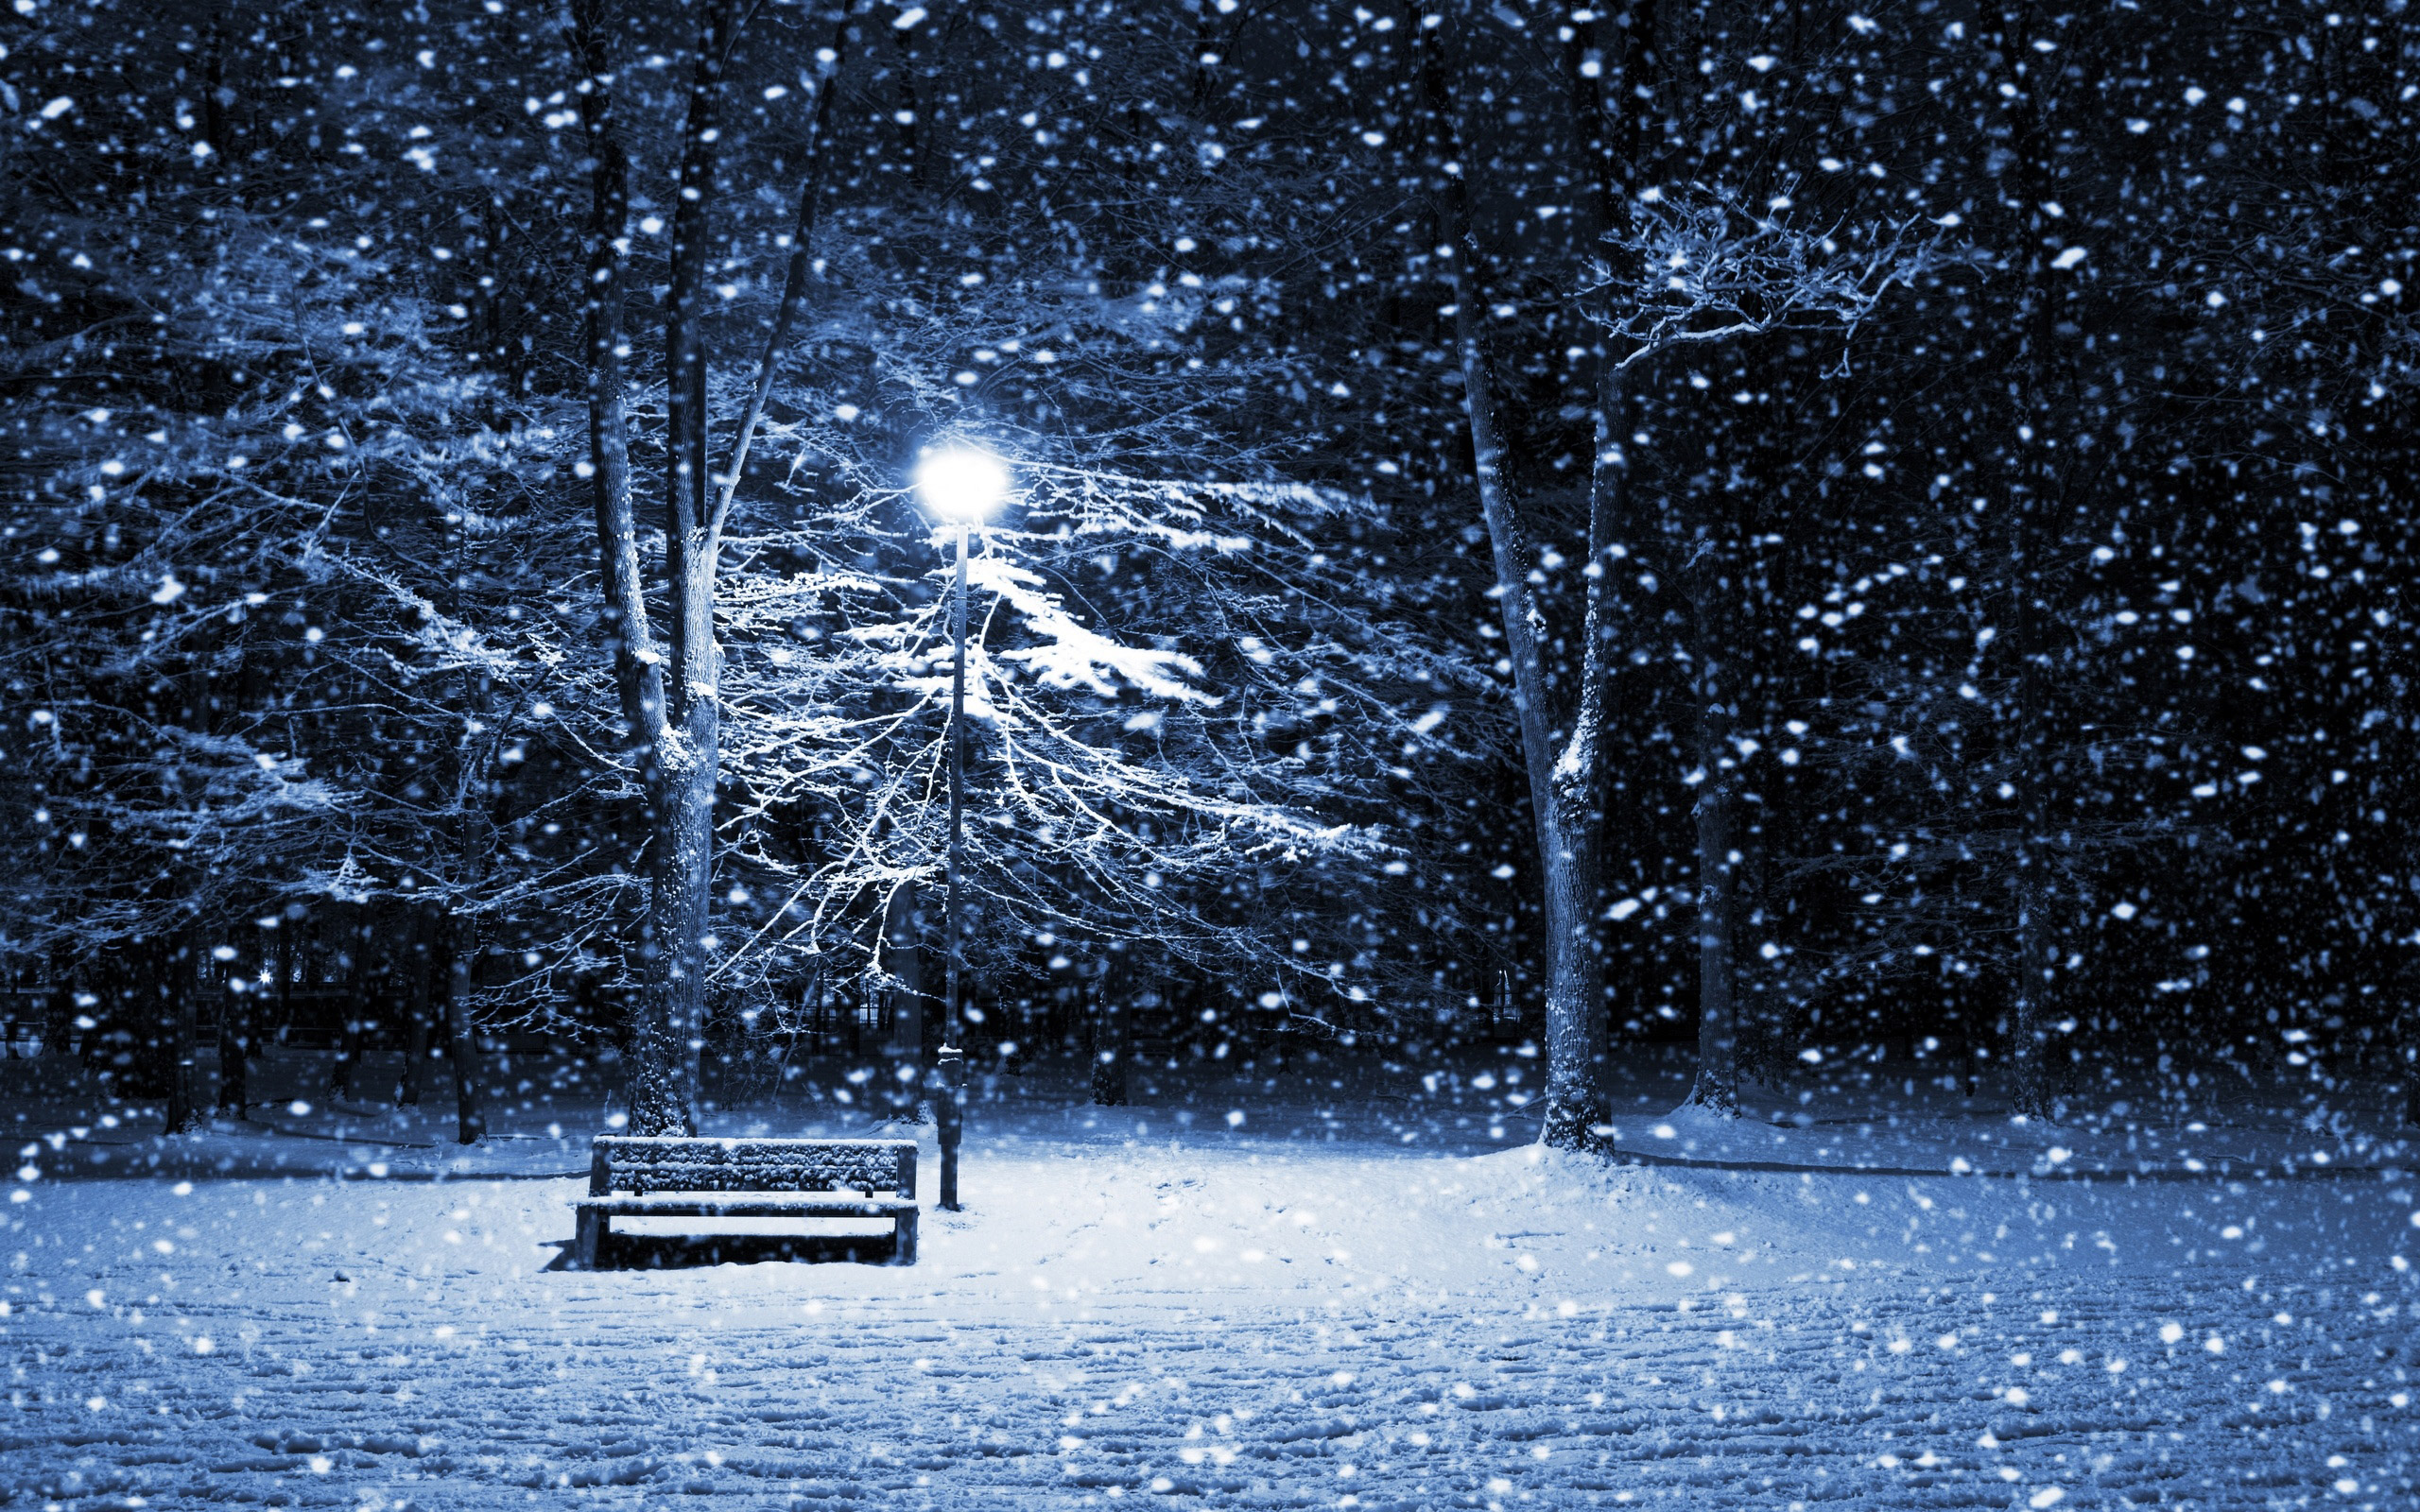 The Post Beautiful Winter Wallpaper Appeared First On Design